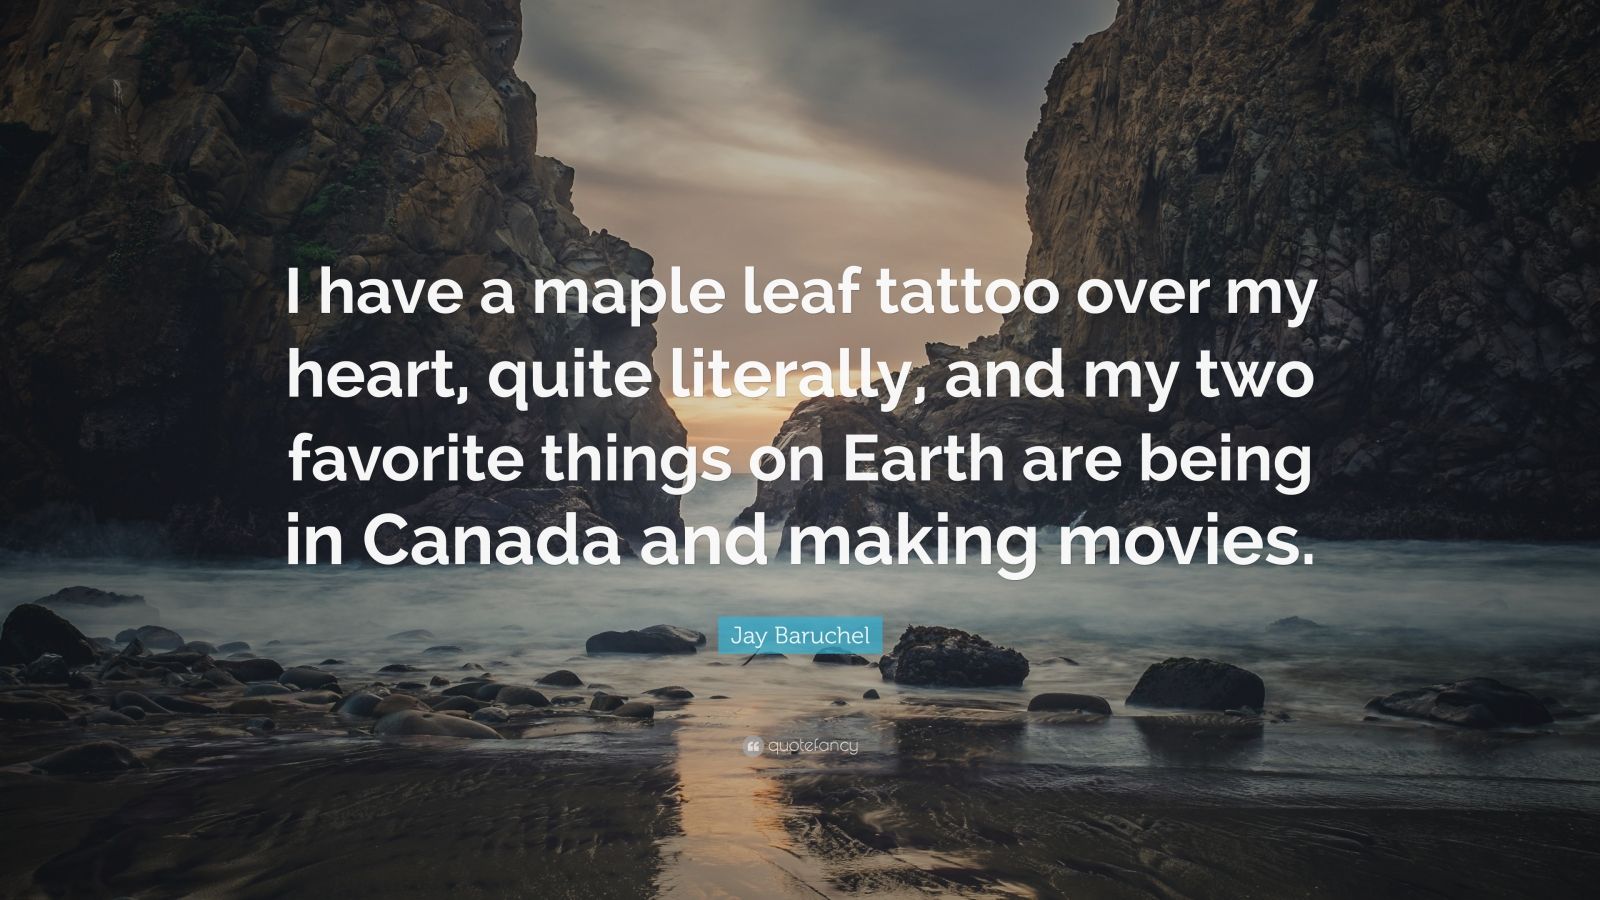 Jay Baruchel Quote: “I have a maple leaf tattoo over my heart, quite